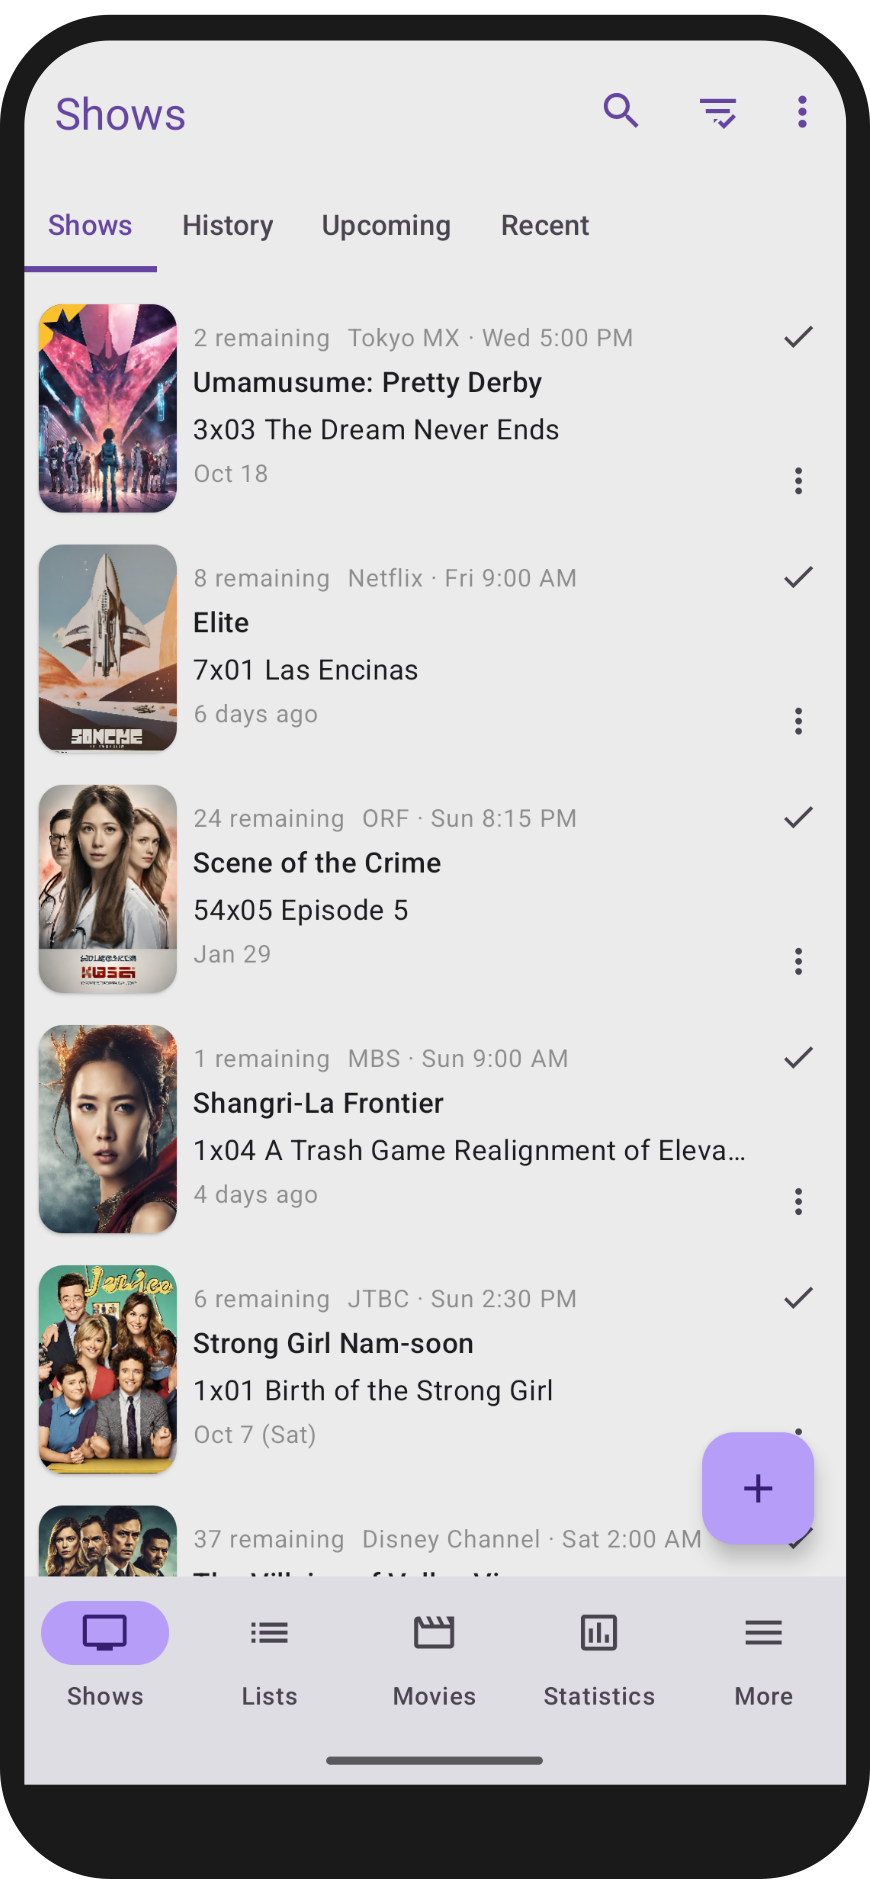 Screenshot showing the main screen of SeriesGuide with a list of shows.